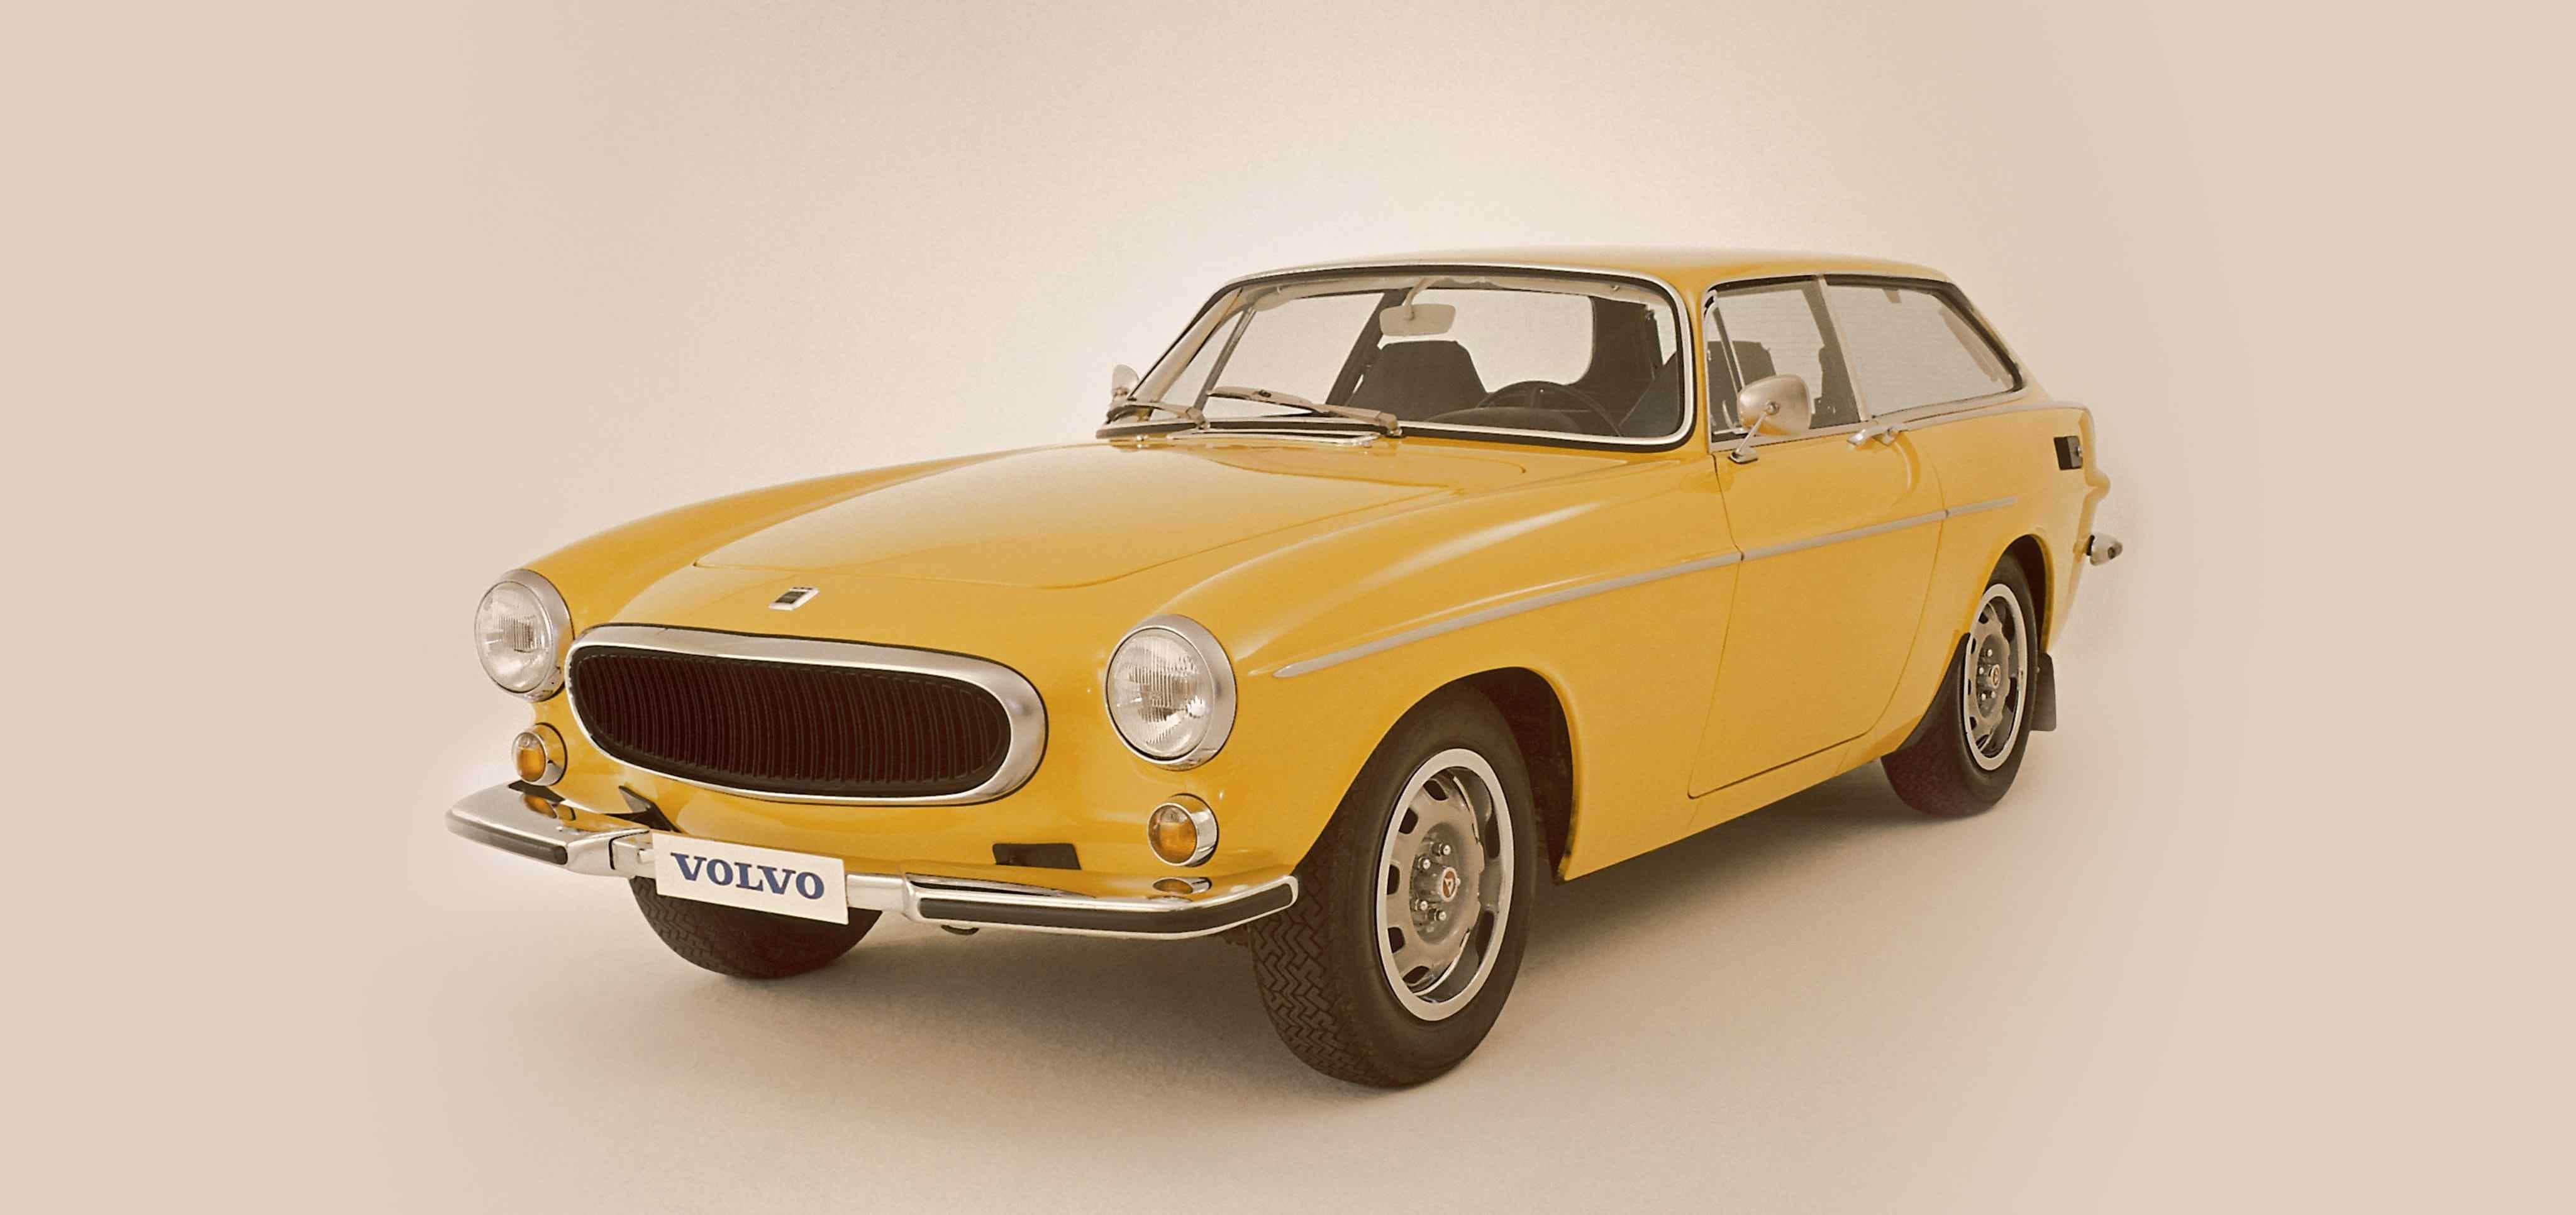 A yellow Volvo 1800ES seen from front left side